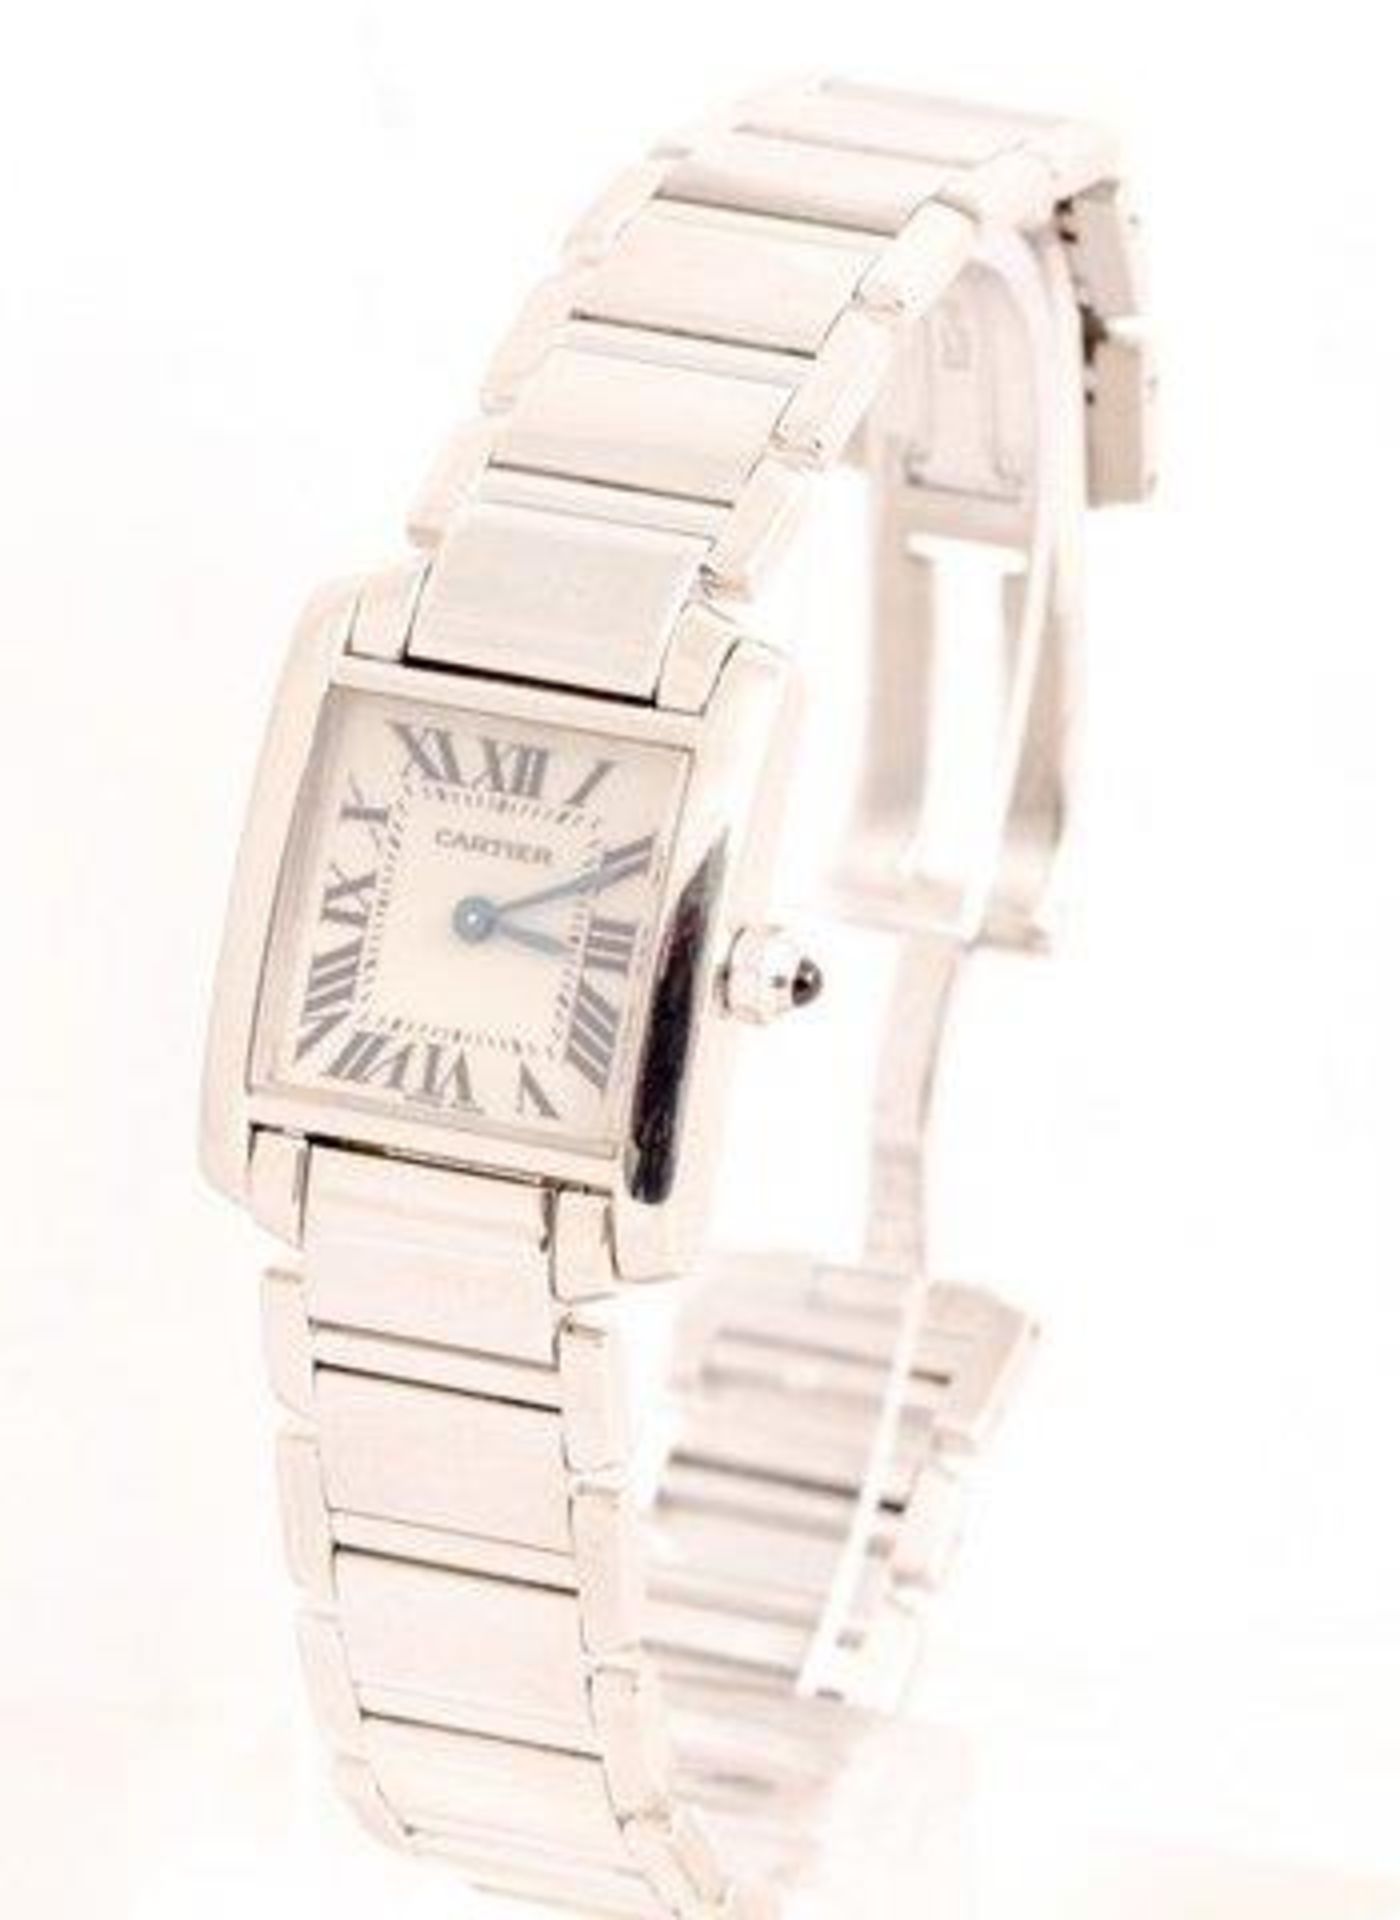 Cartier Tank Francaise Ladies 18ct White Gold Watch - Image 2 of 4